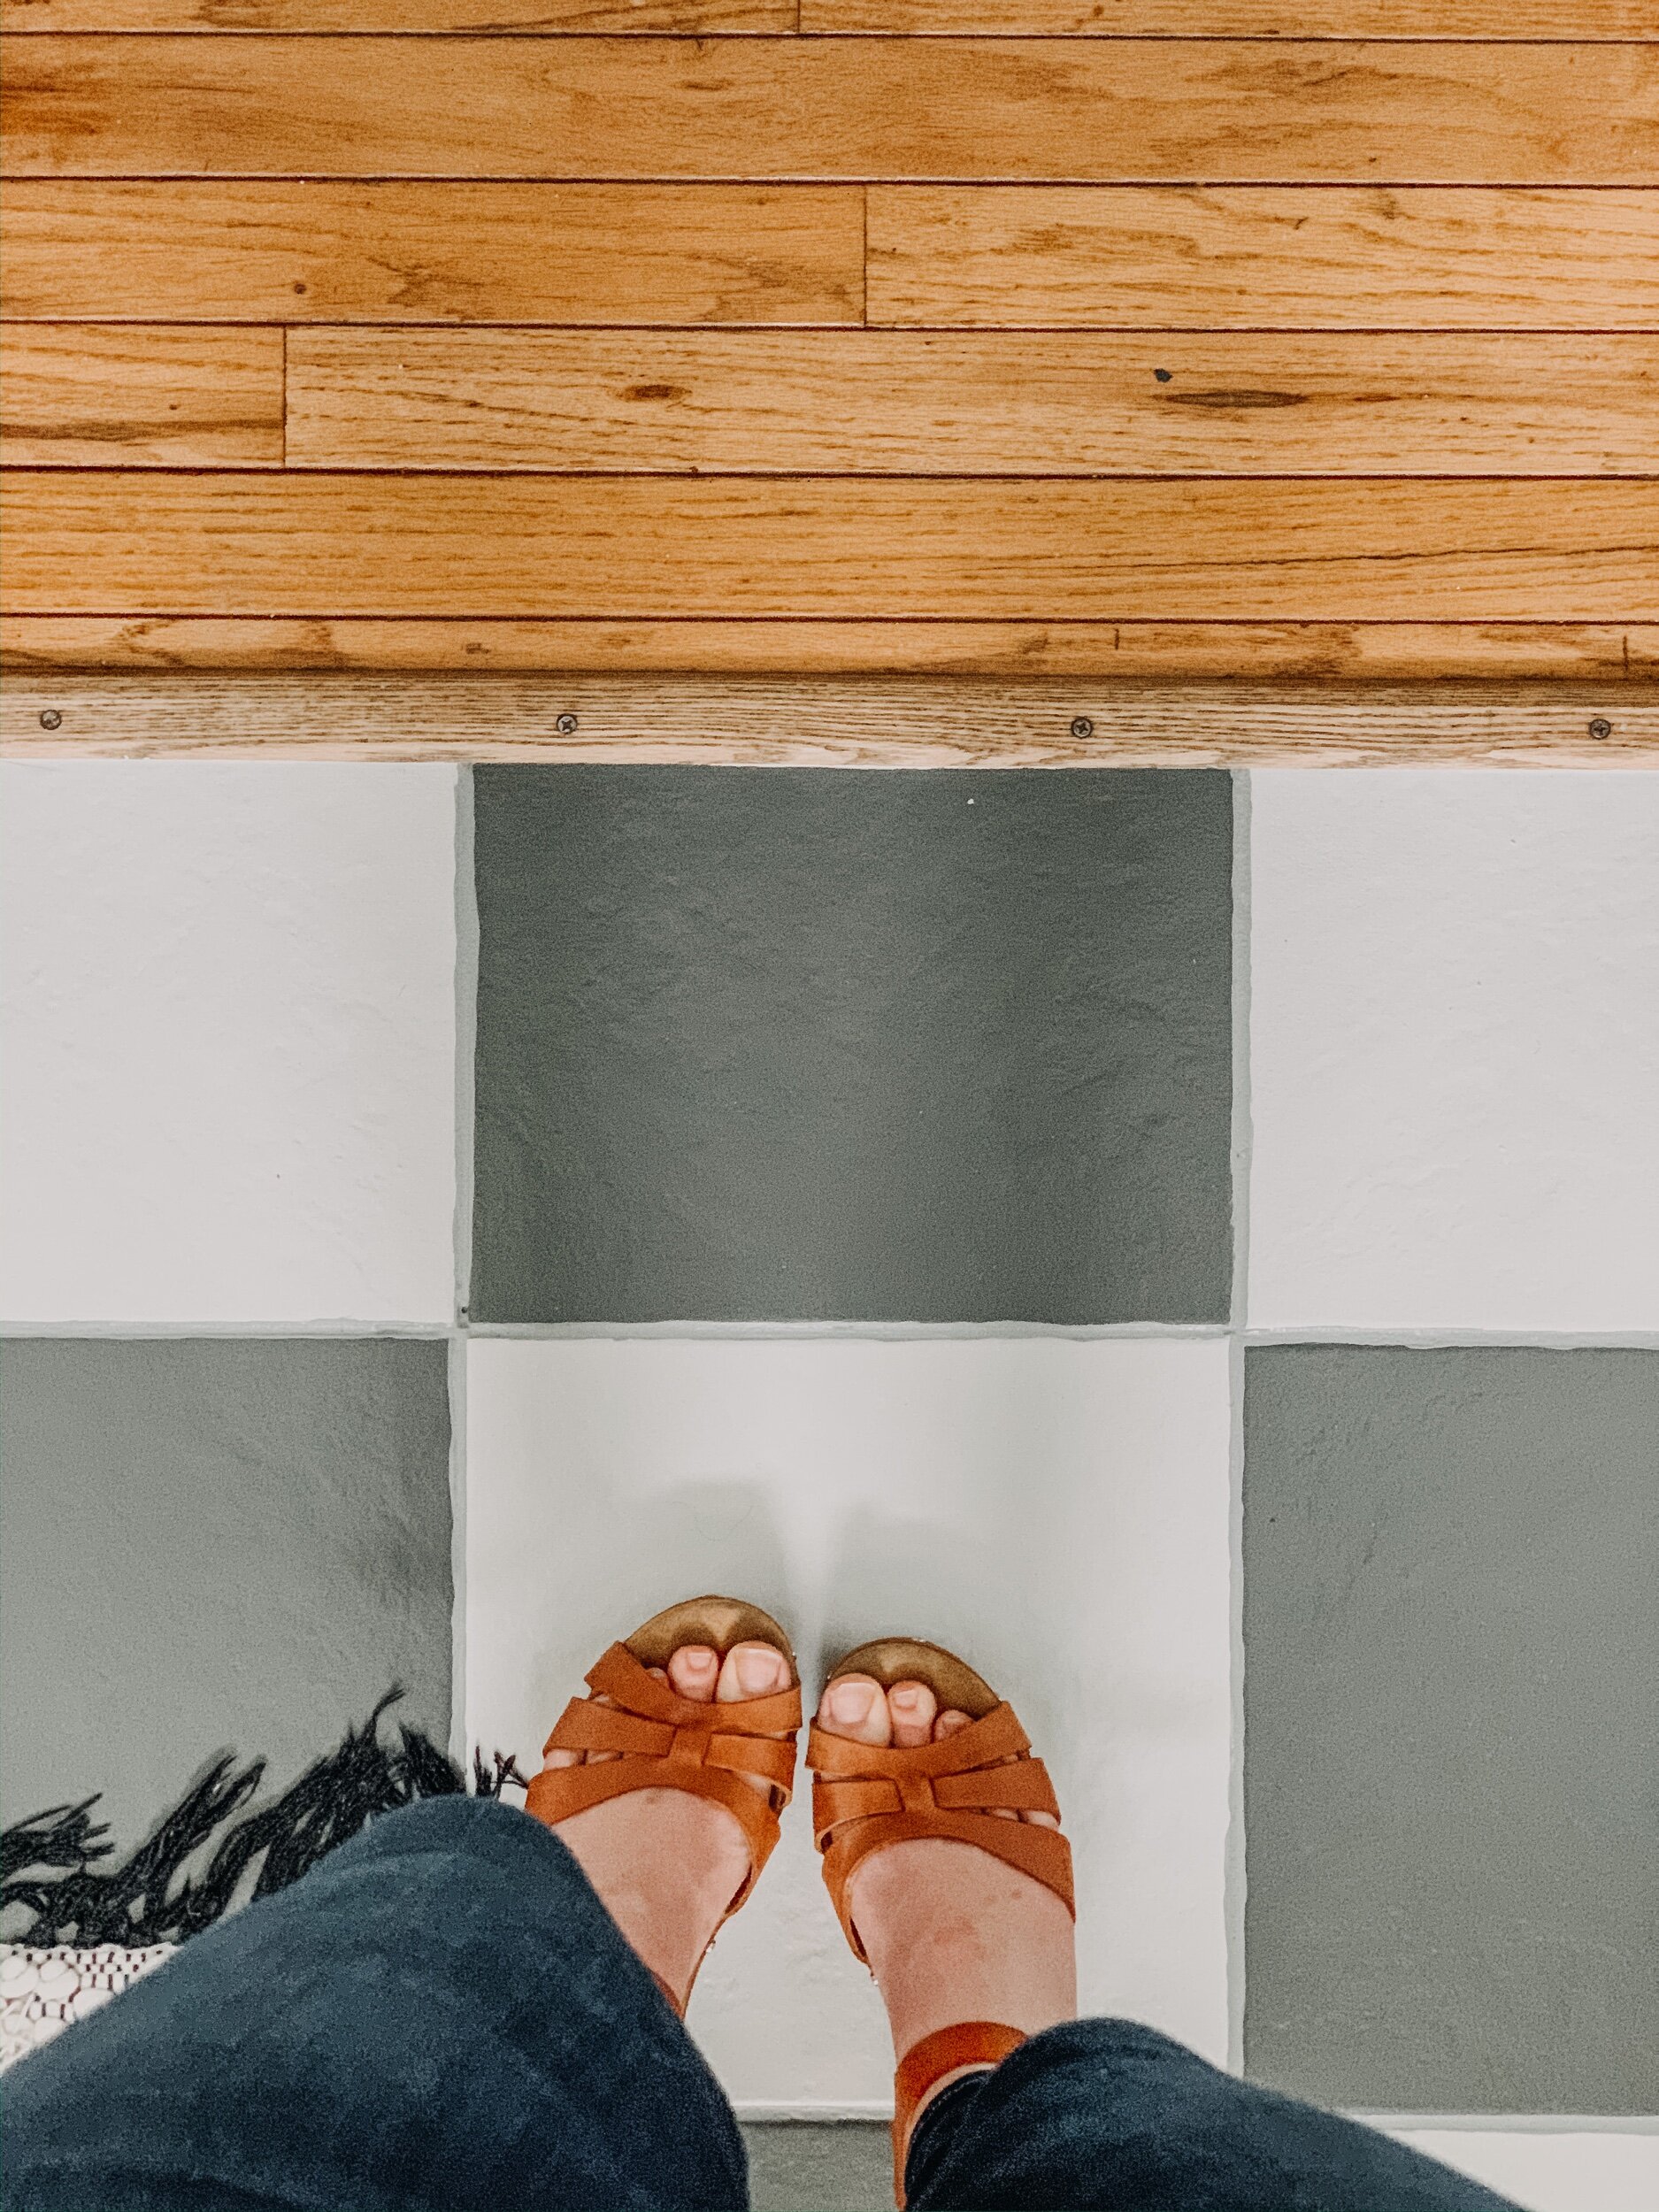 this is a photo of a pair of feet on a painted tile floor